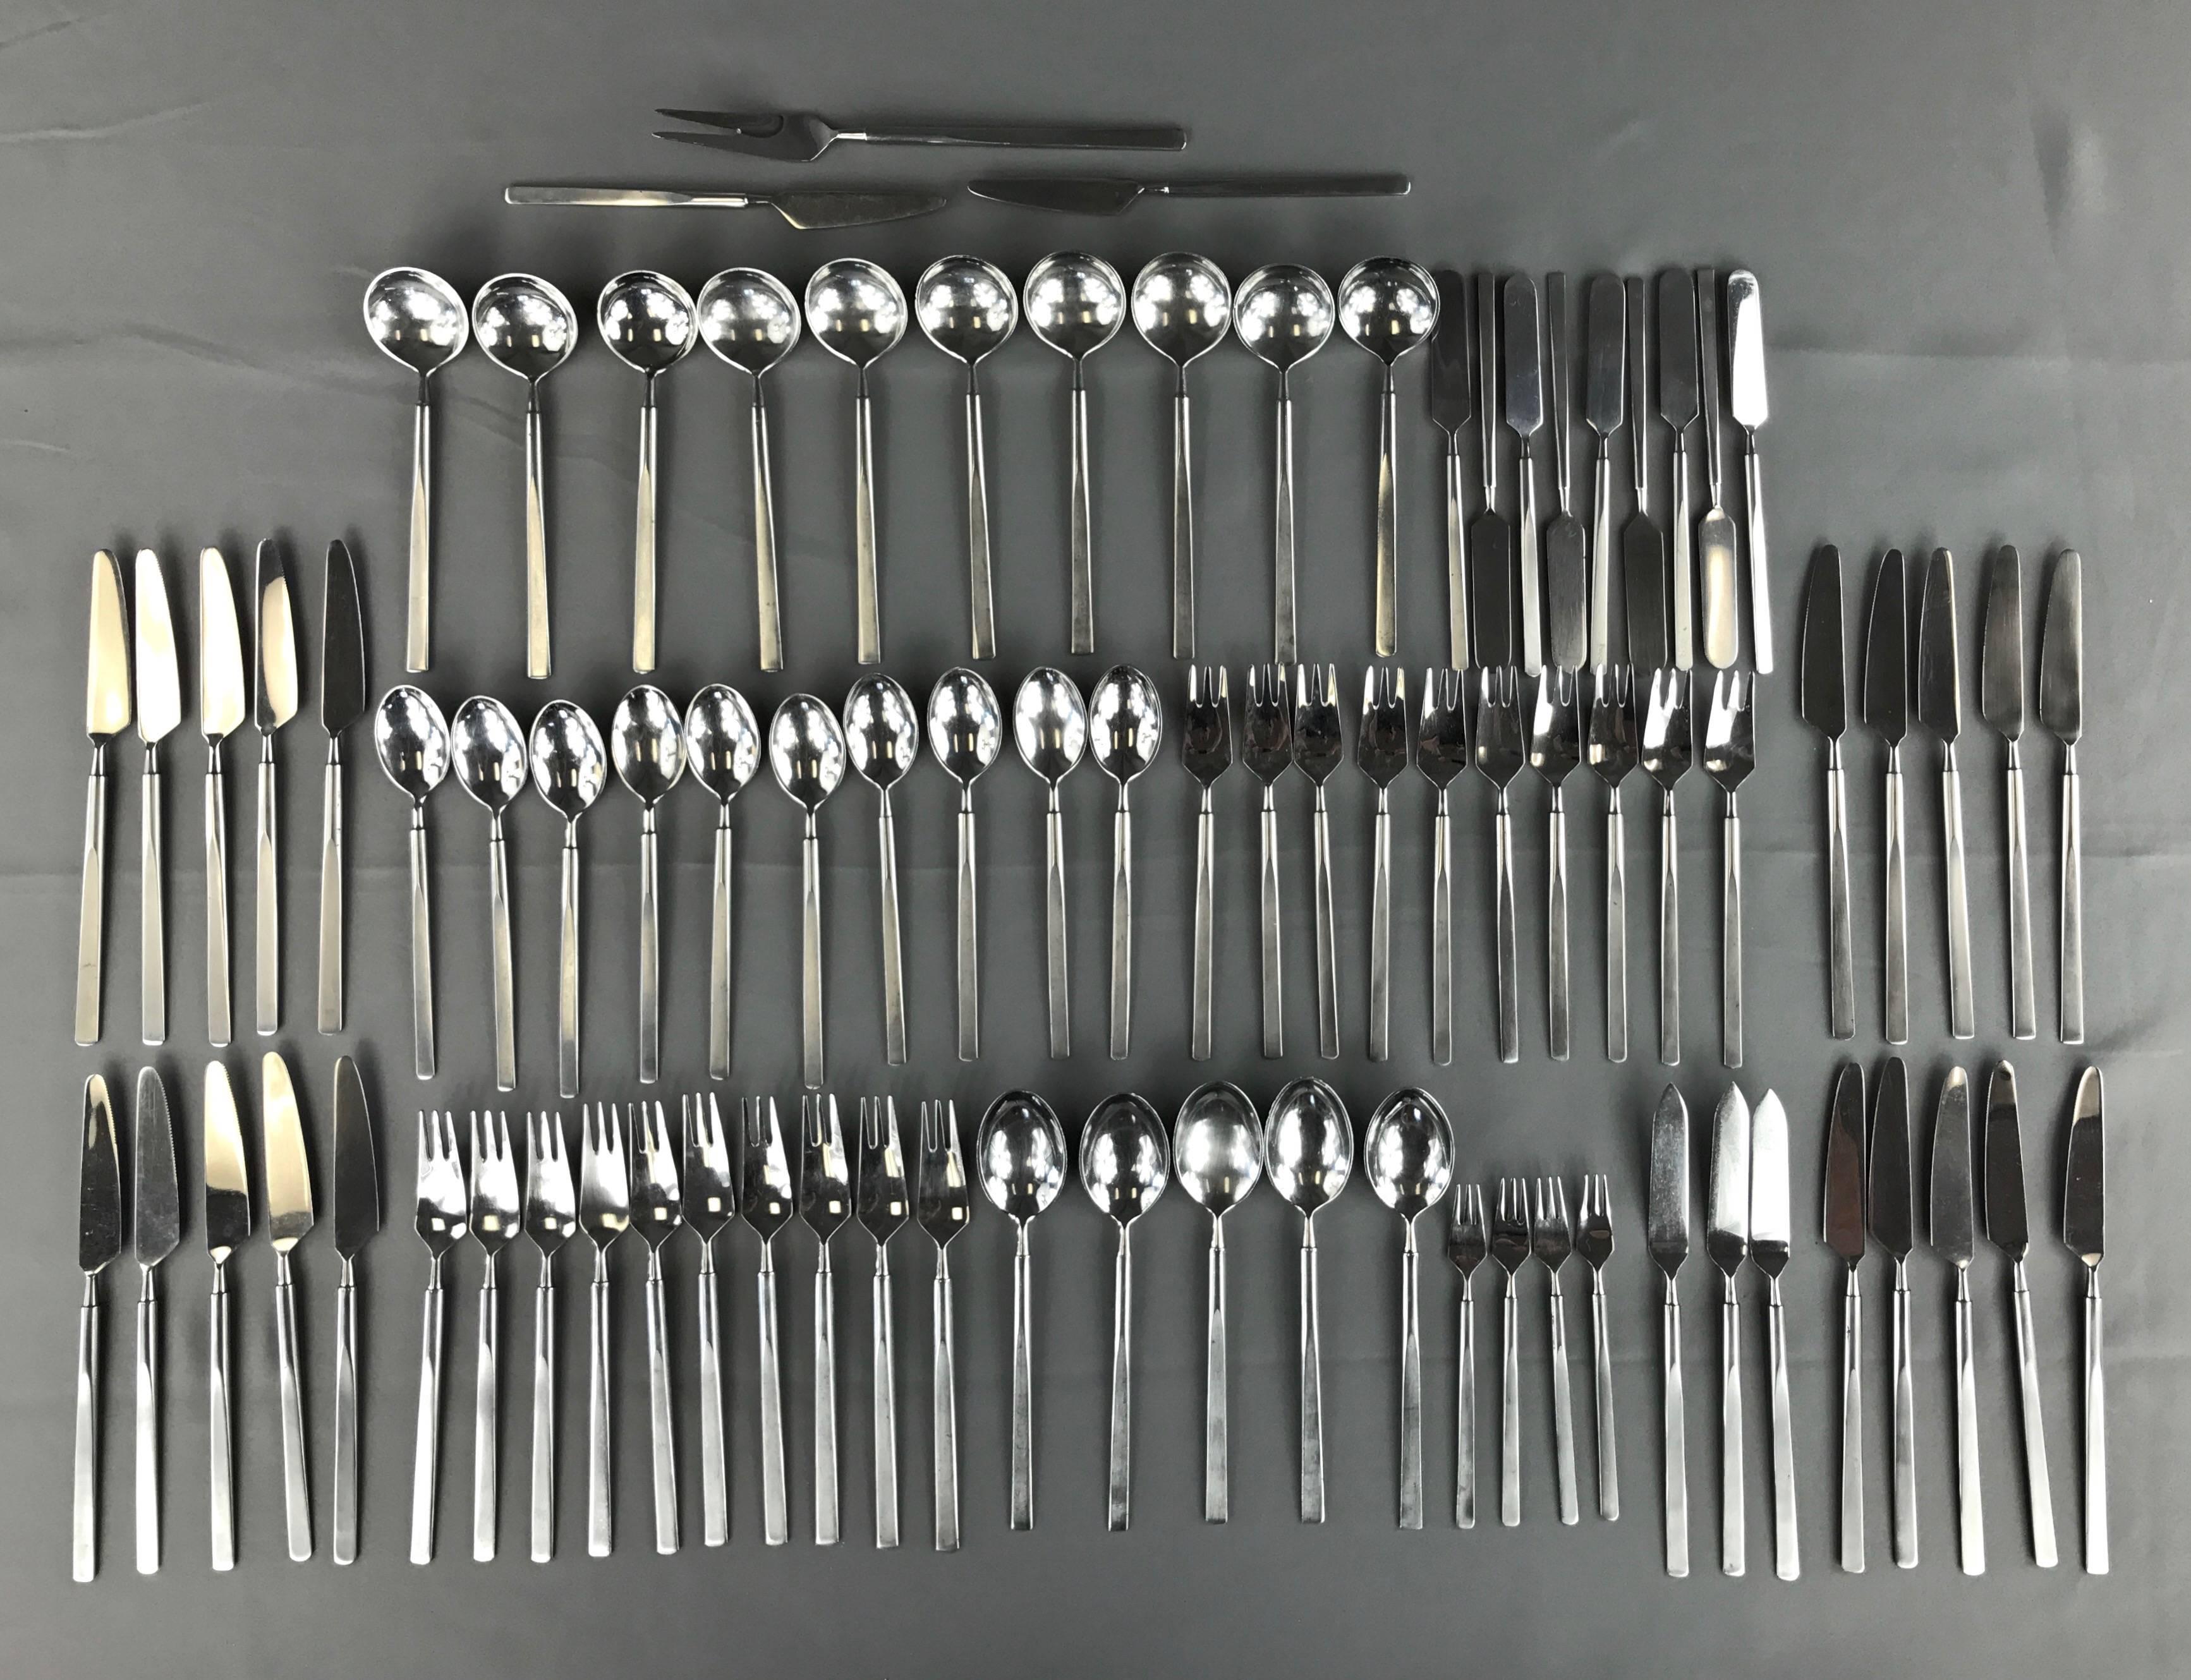 A vintage “Obelisk” 89-piece stainless steel flatware service for ten designed by Erik Herlow for Copenhagen Cutlery in 1954.

Set comprised of nine eight-piece settings, one seven-piece setting sans butter knife, and ten assorted serving pieces.